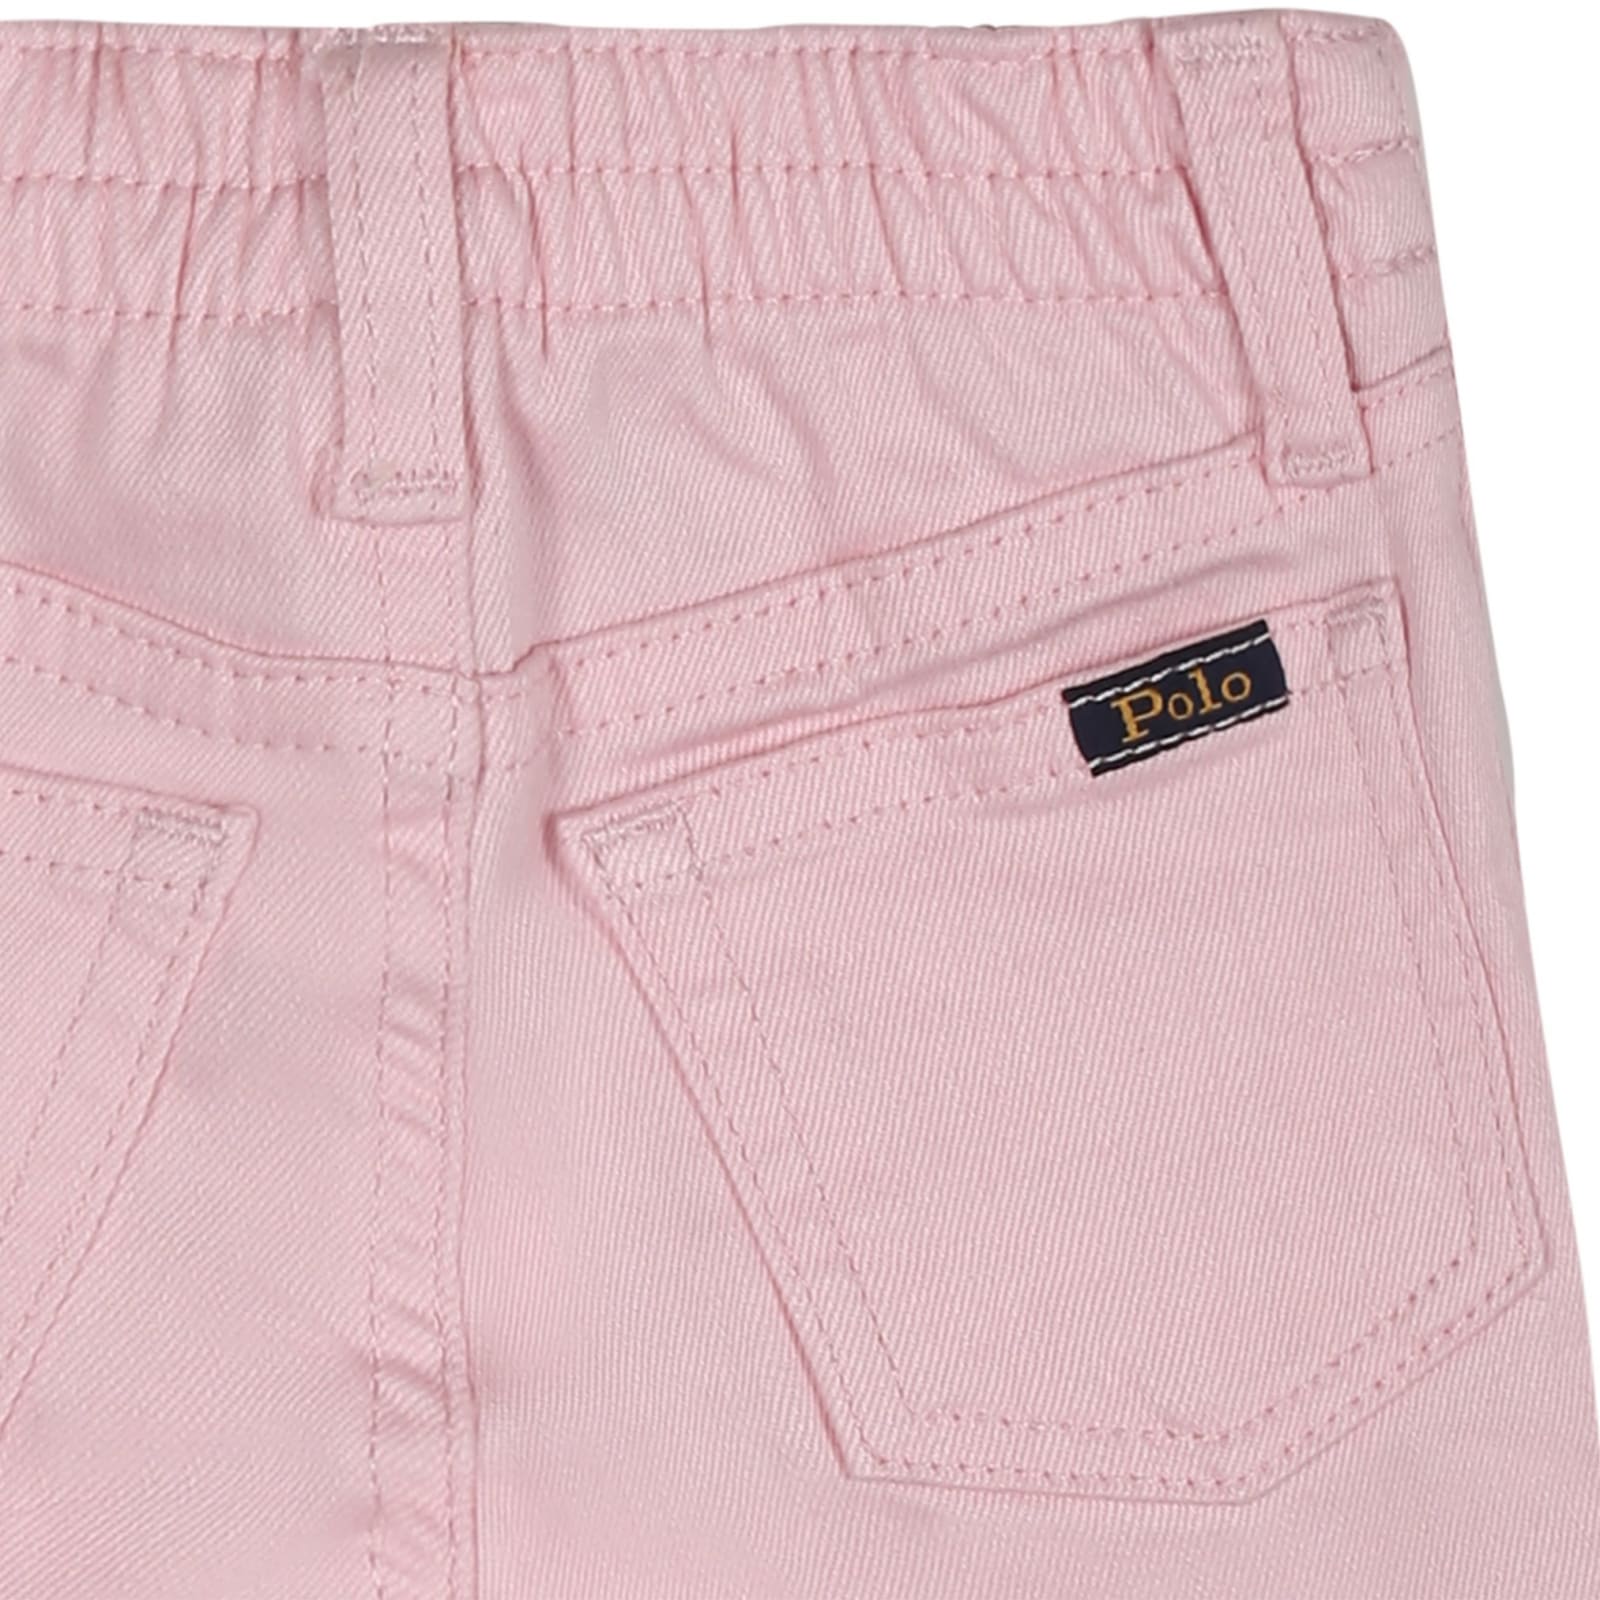 Shop Ralph Lauren Pink Jeans For Baby Girl With Logo